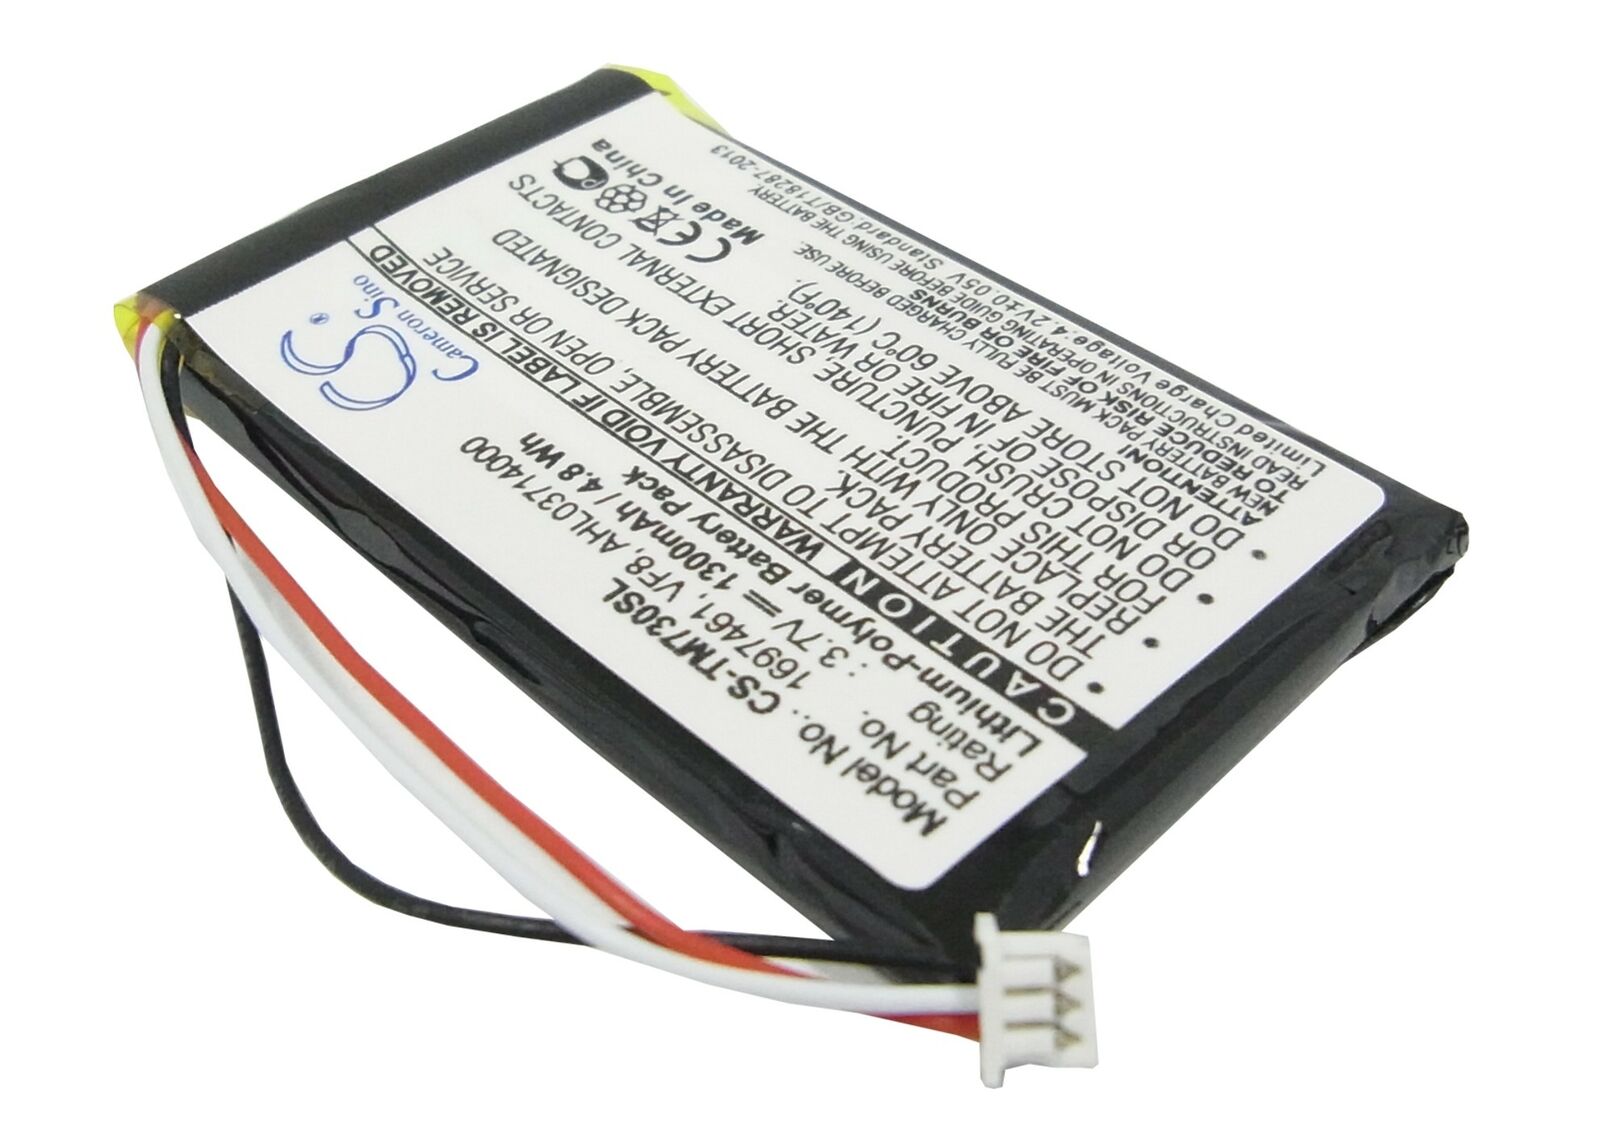 Batterie TomTom GO530 (4CH5.000.00), 930T, 1697461, AHL03714000, VF8, Go(compatible)